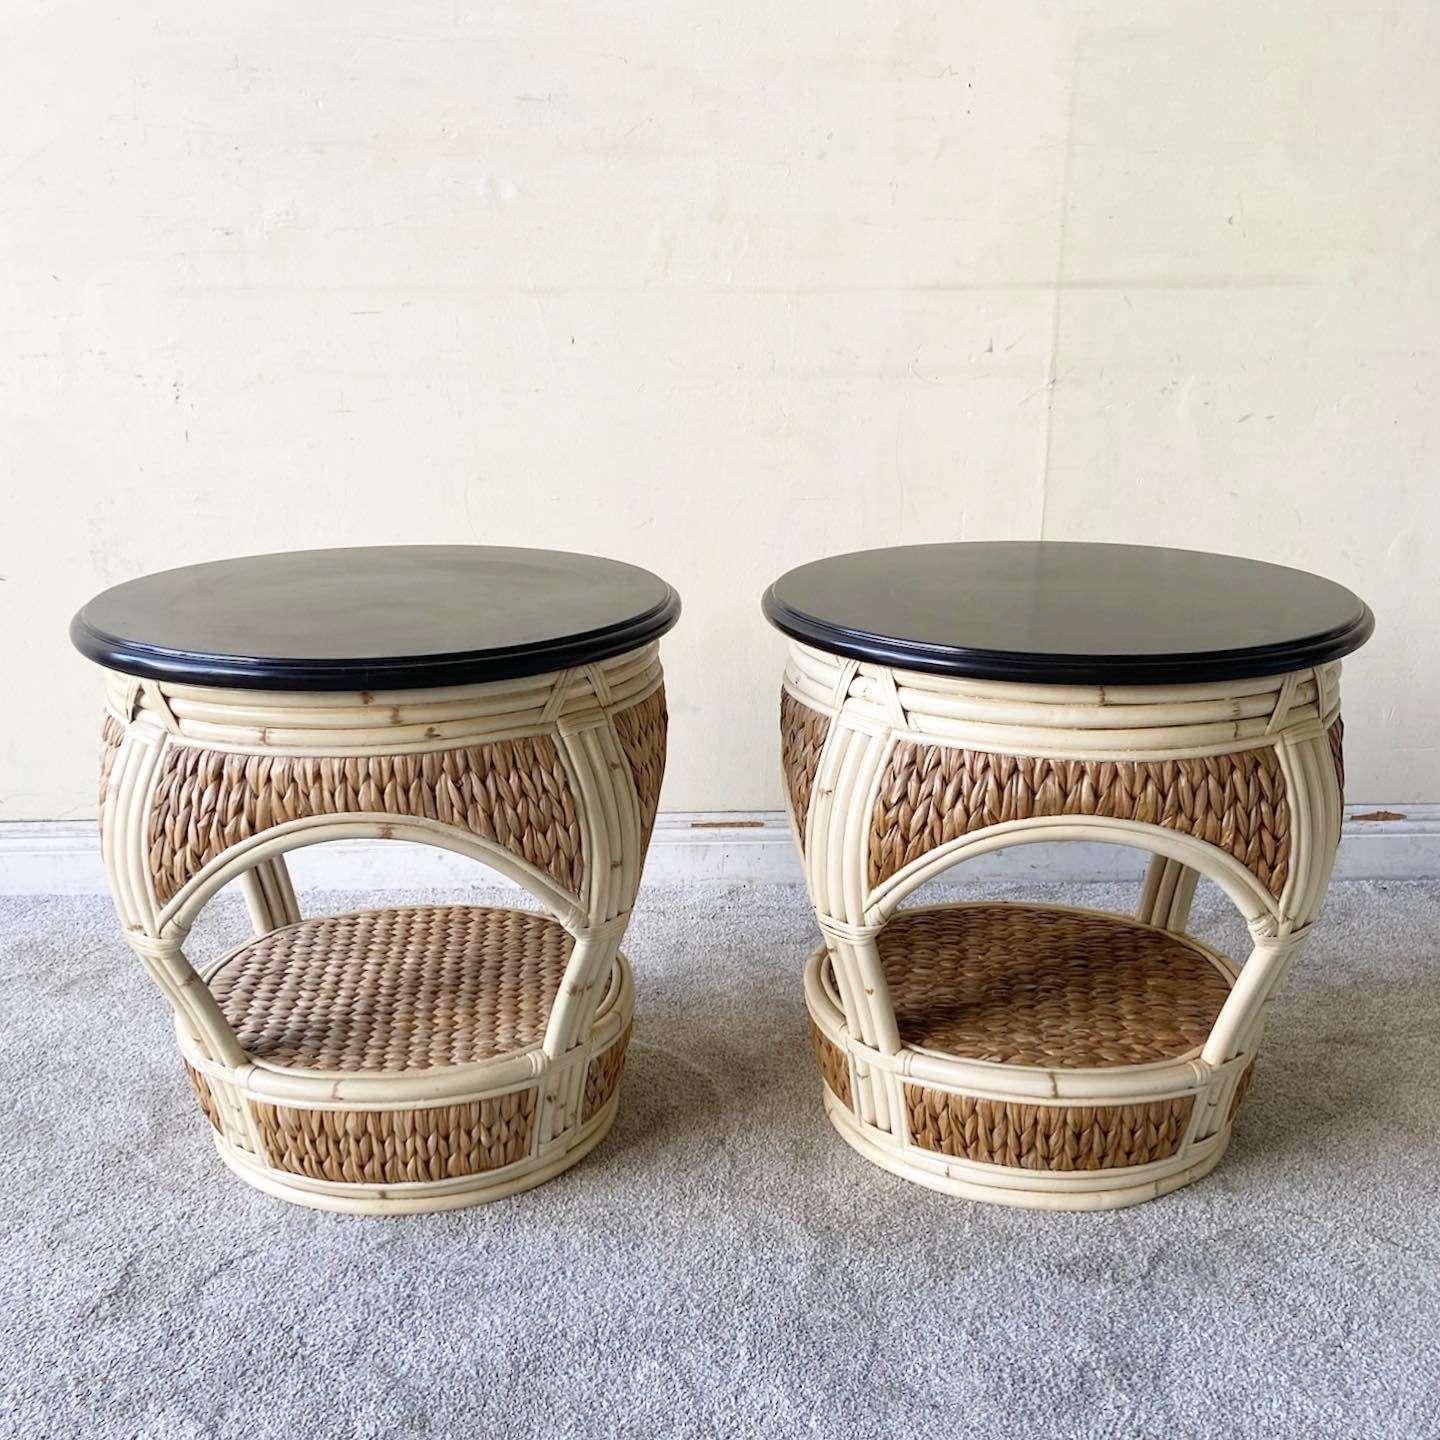 Philippine Boho Chic Bamboo and Sea Grass Circular Side Tables - a Pair For Sale